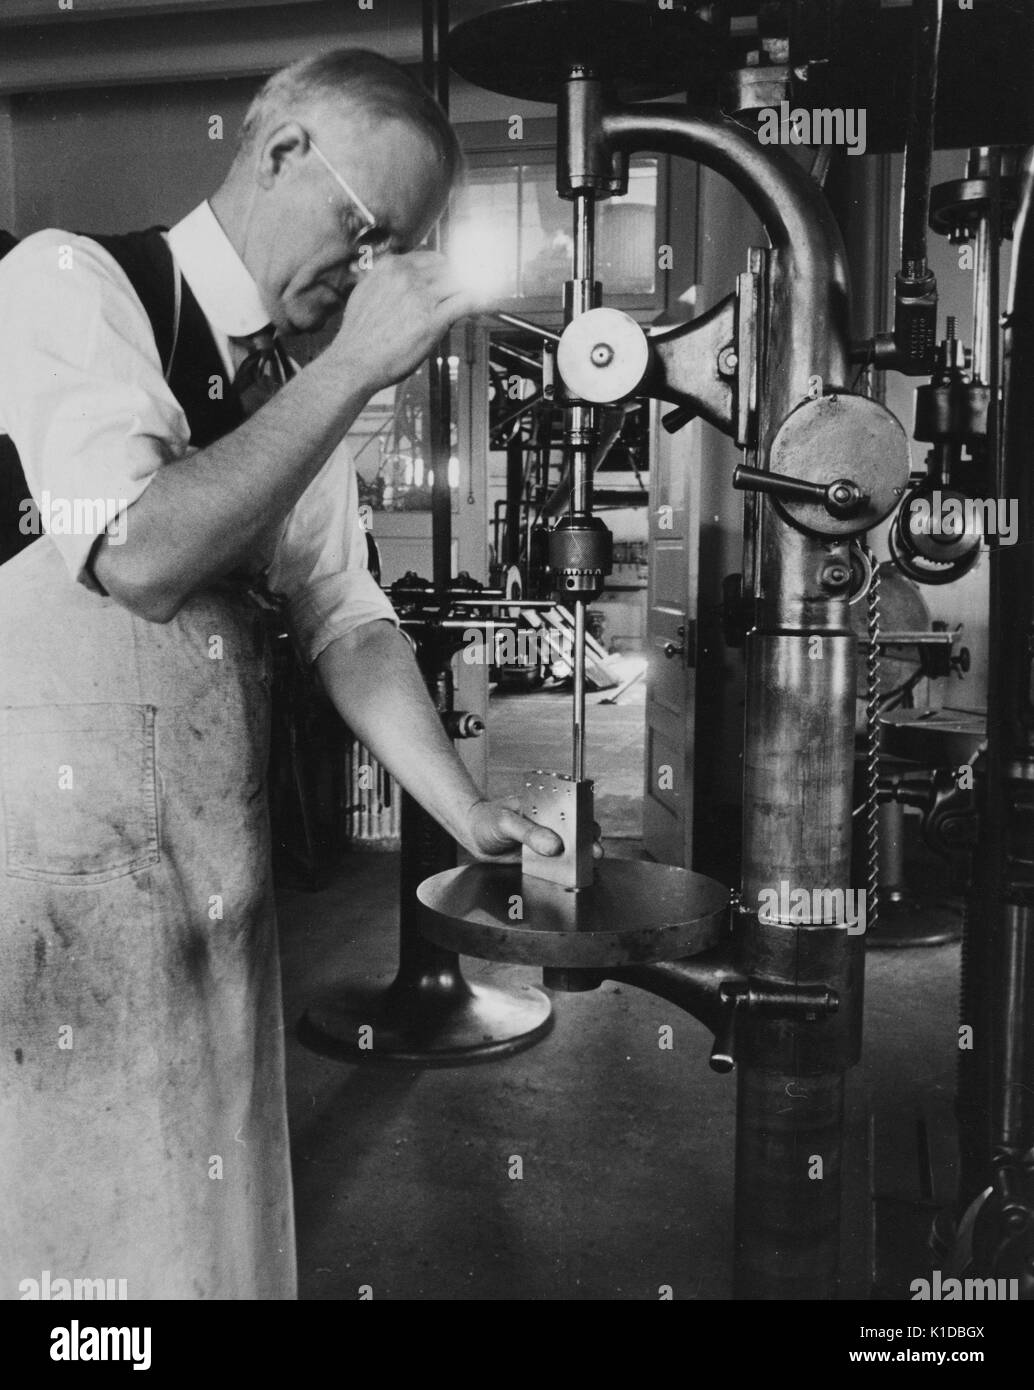 Man wearing a worn apron and using a drill press to drill into a block of metal in a machine shop, Greenbelt, Maryland, 1935. From the New York Public Library. Stock Photo